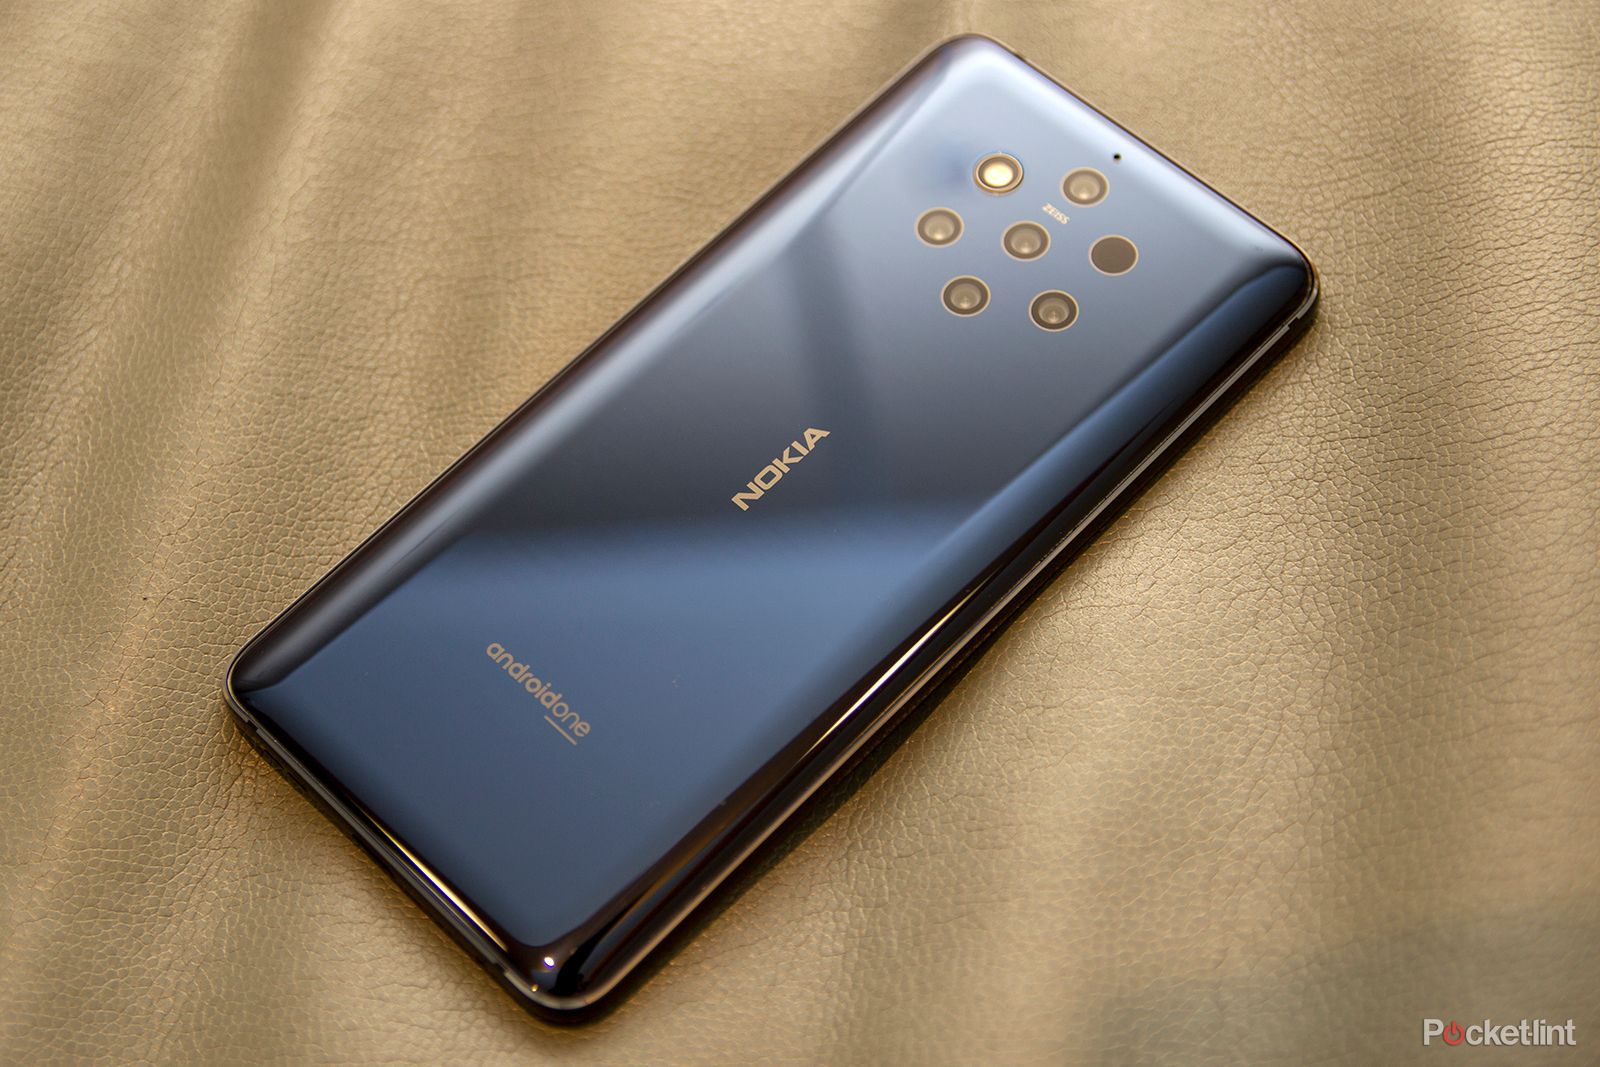 Why the Nokia 9 PureView uses Qualcomm Snapdragon 845 image 1